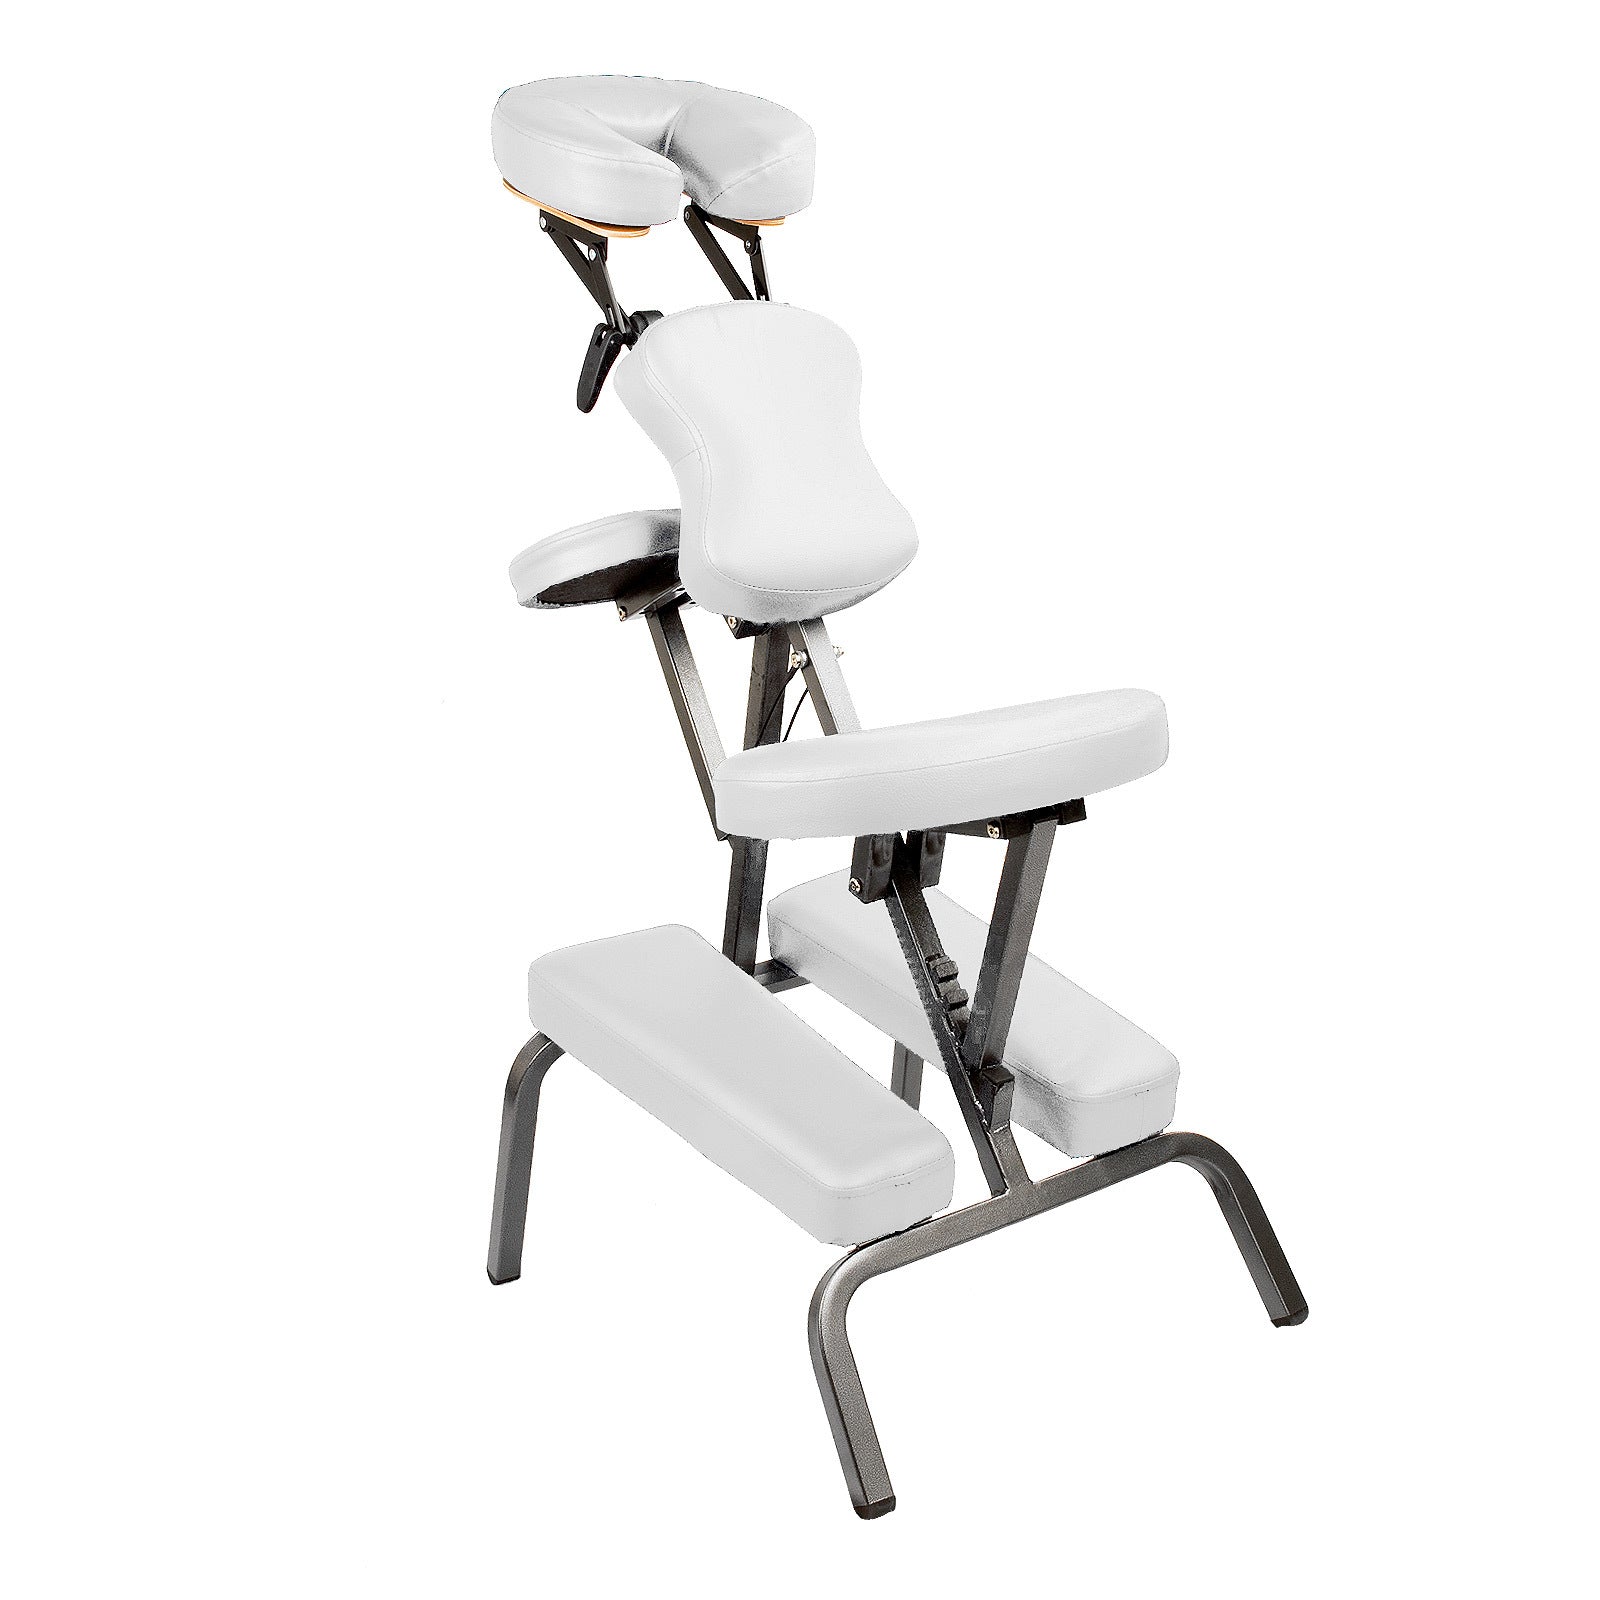 forever-beauty-white-portable-beauty-massage-foldable-chair-table-therapy-waxing-aluminium